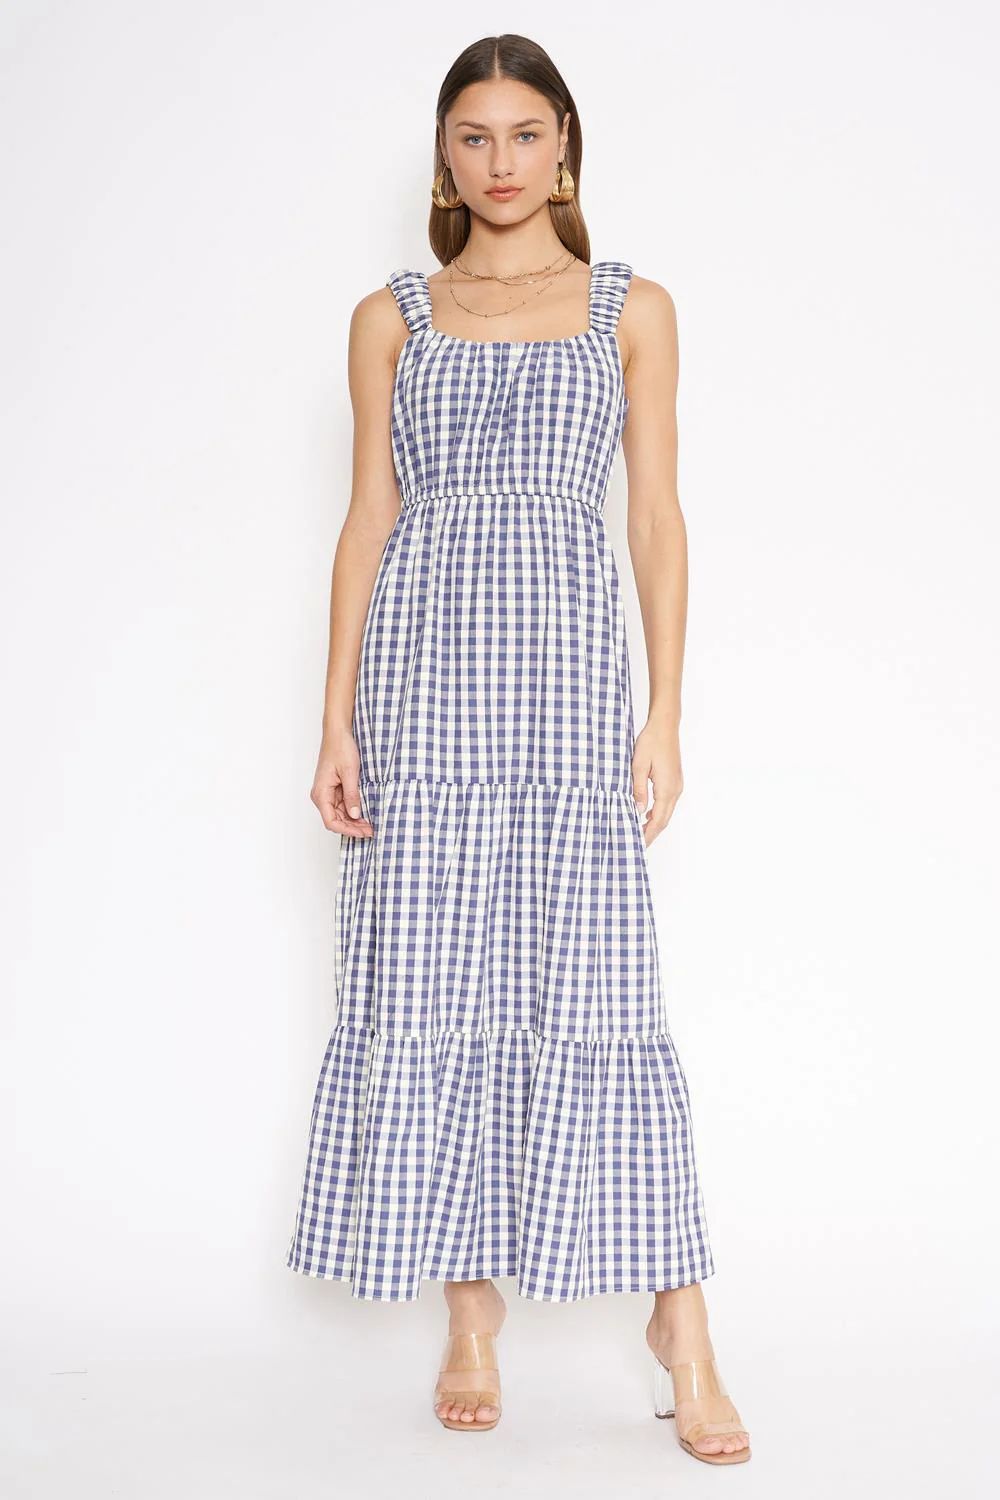 4SI3NNA Women's Sleeveless Gingham Smock Dress in Navy Large Lord & Taylor | Lord & Taylor